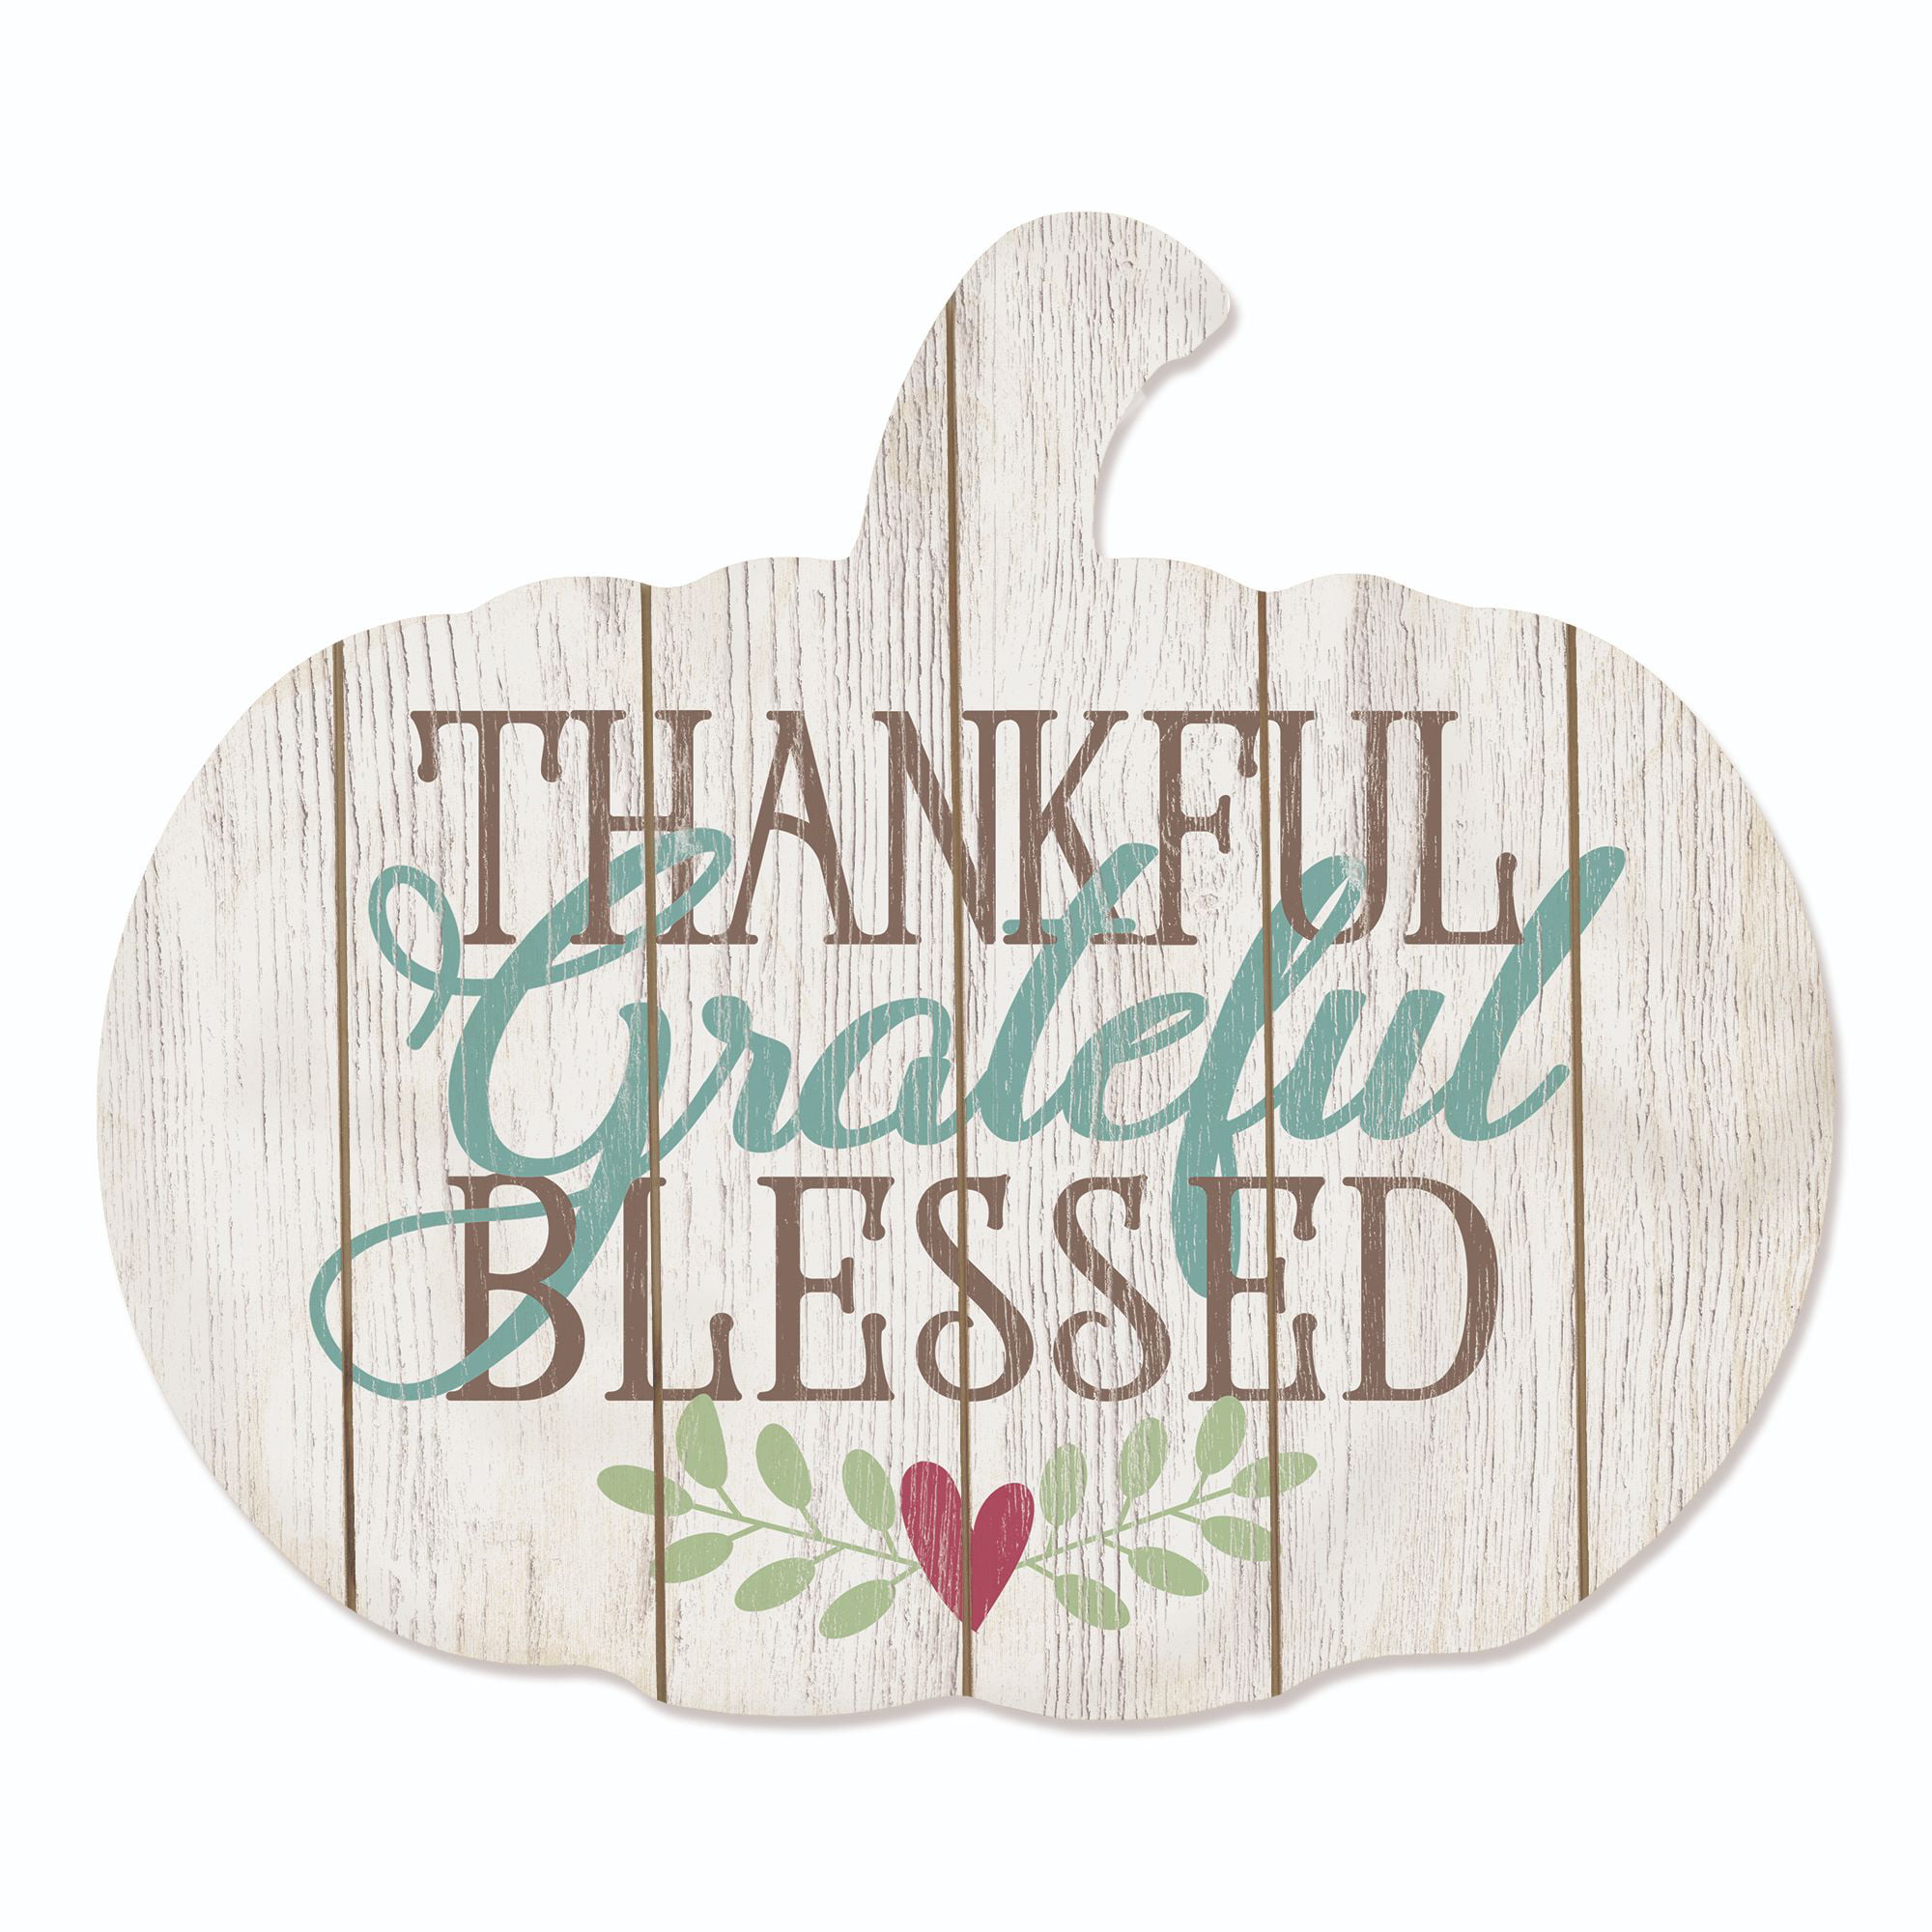 Stacked Pumpkin sign with bright colors grateful thankful blessed Wood Cut Out Door Hanger